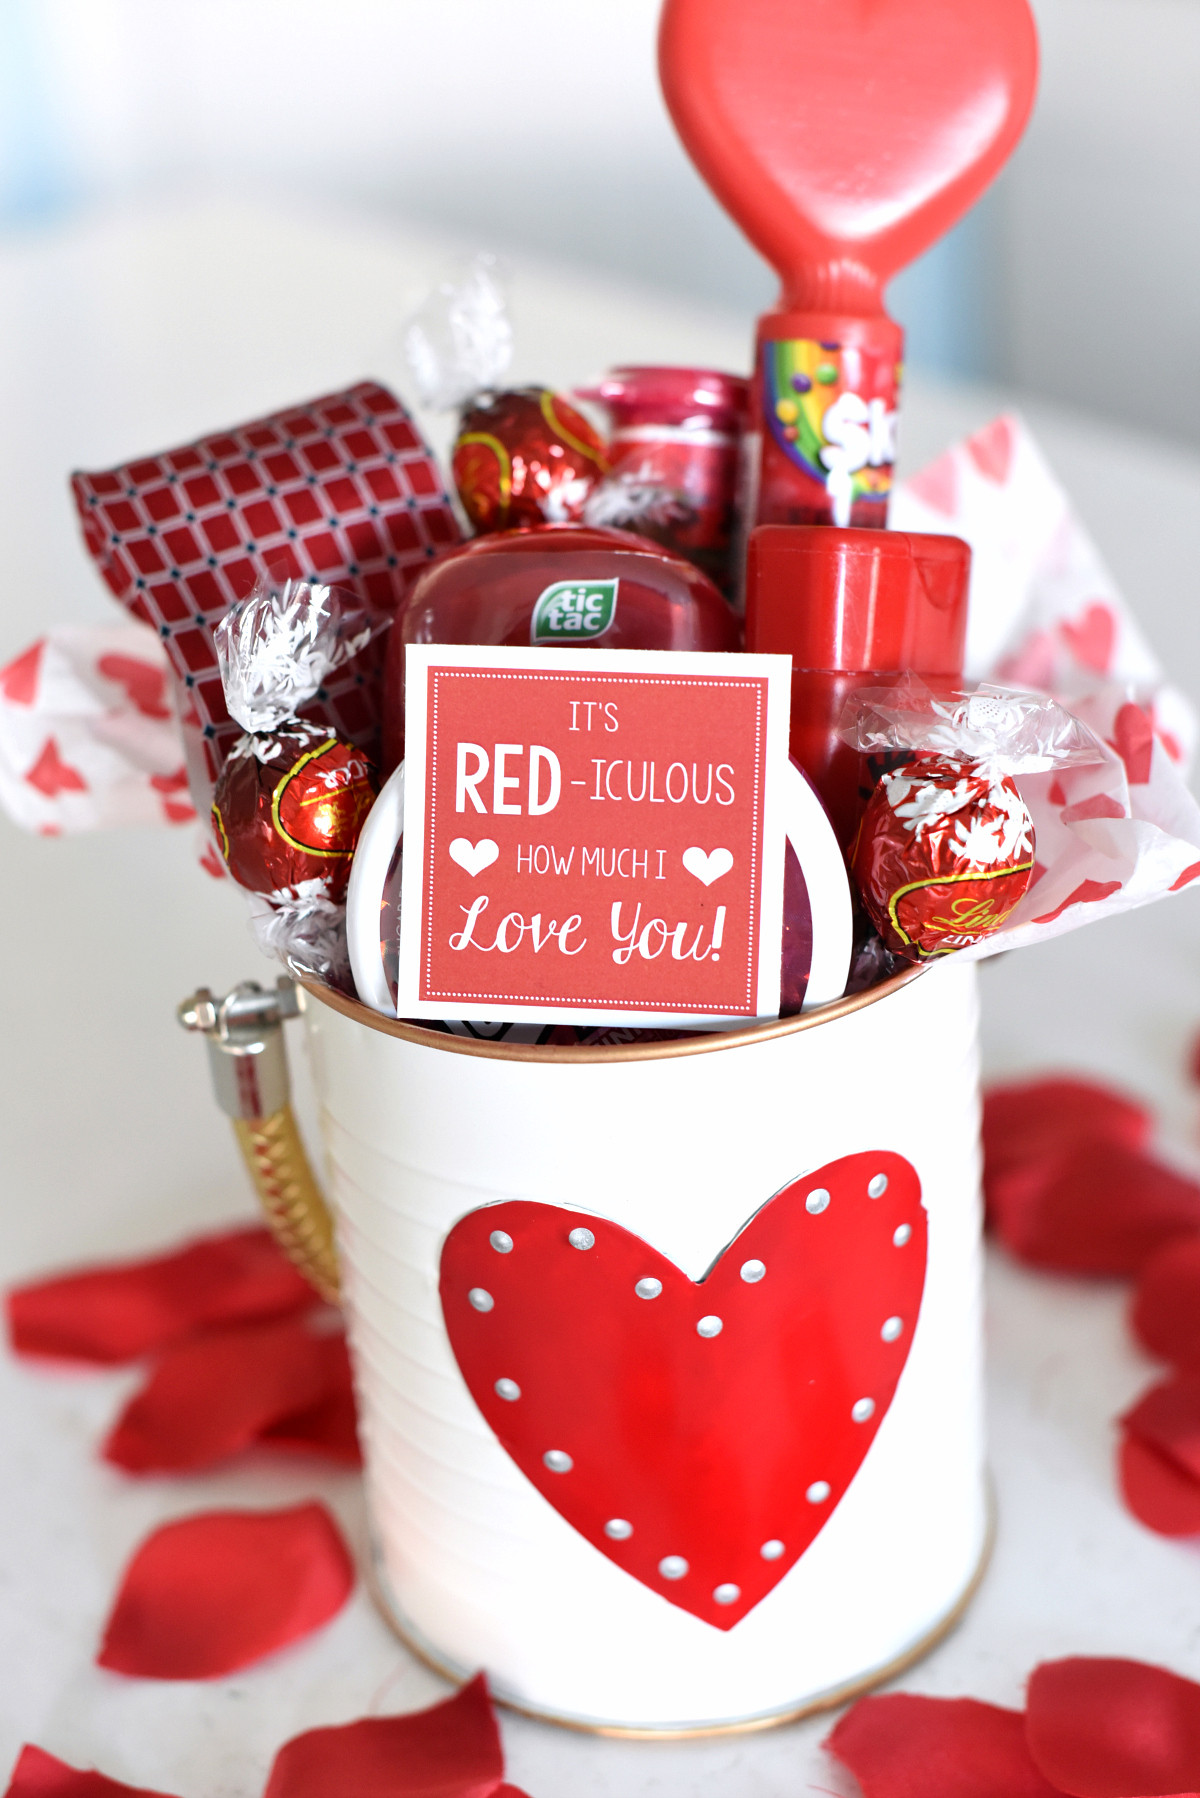 Valentine'S Day Gift Ideas For Husband
 Cute Valentine s Day Gift Idea RED iculous Basket